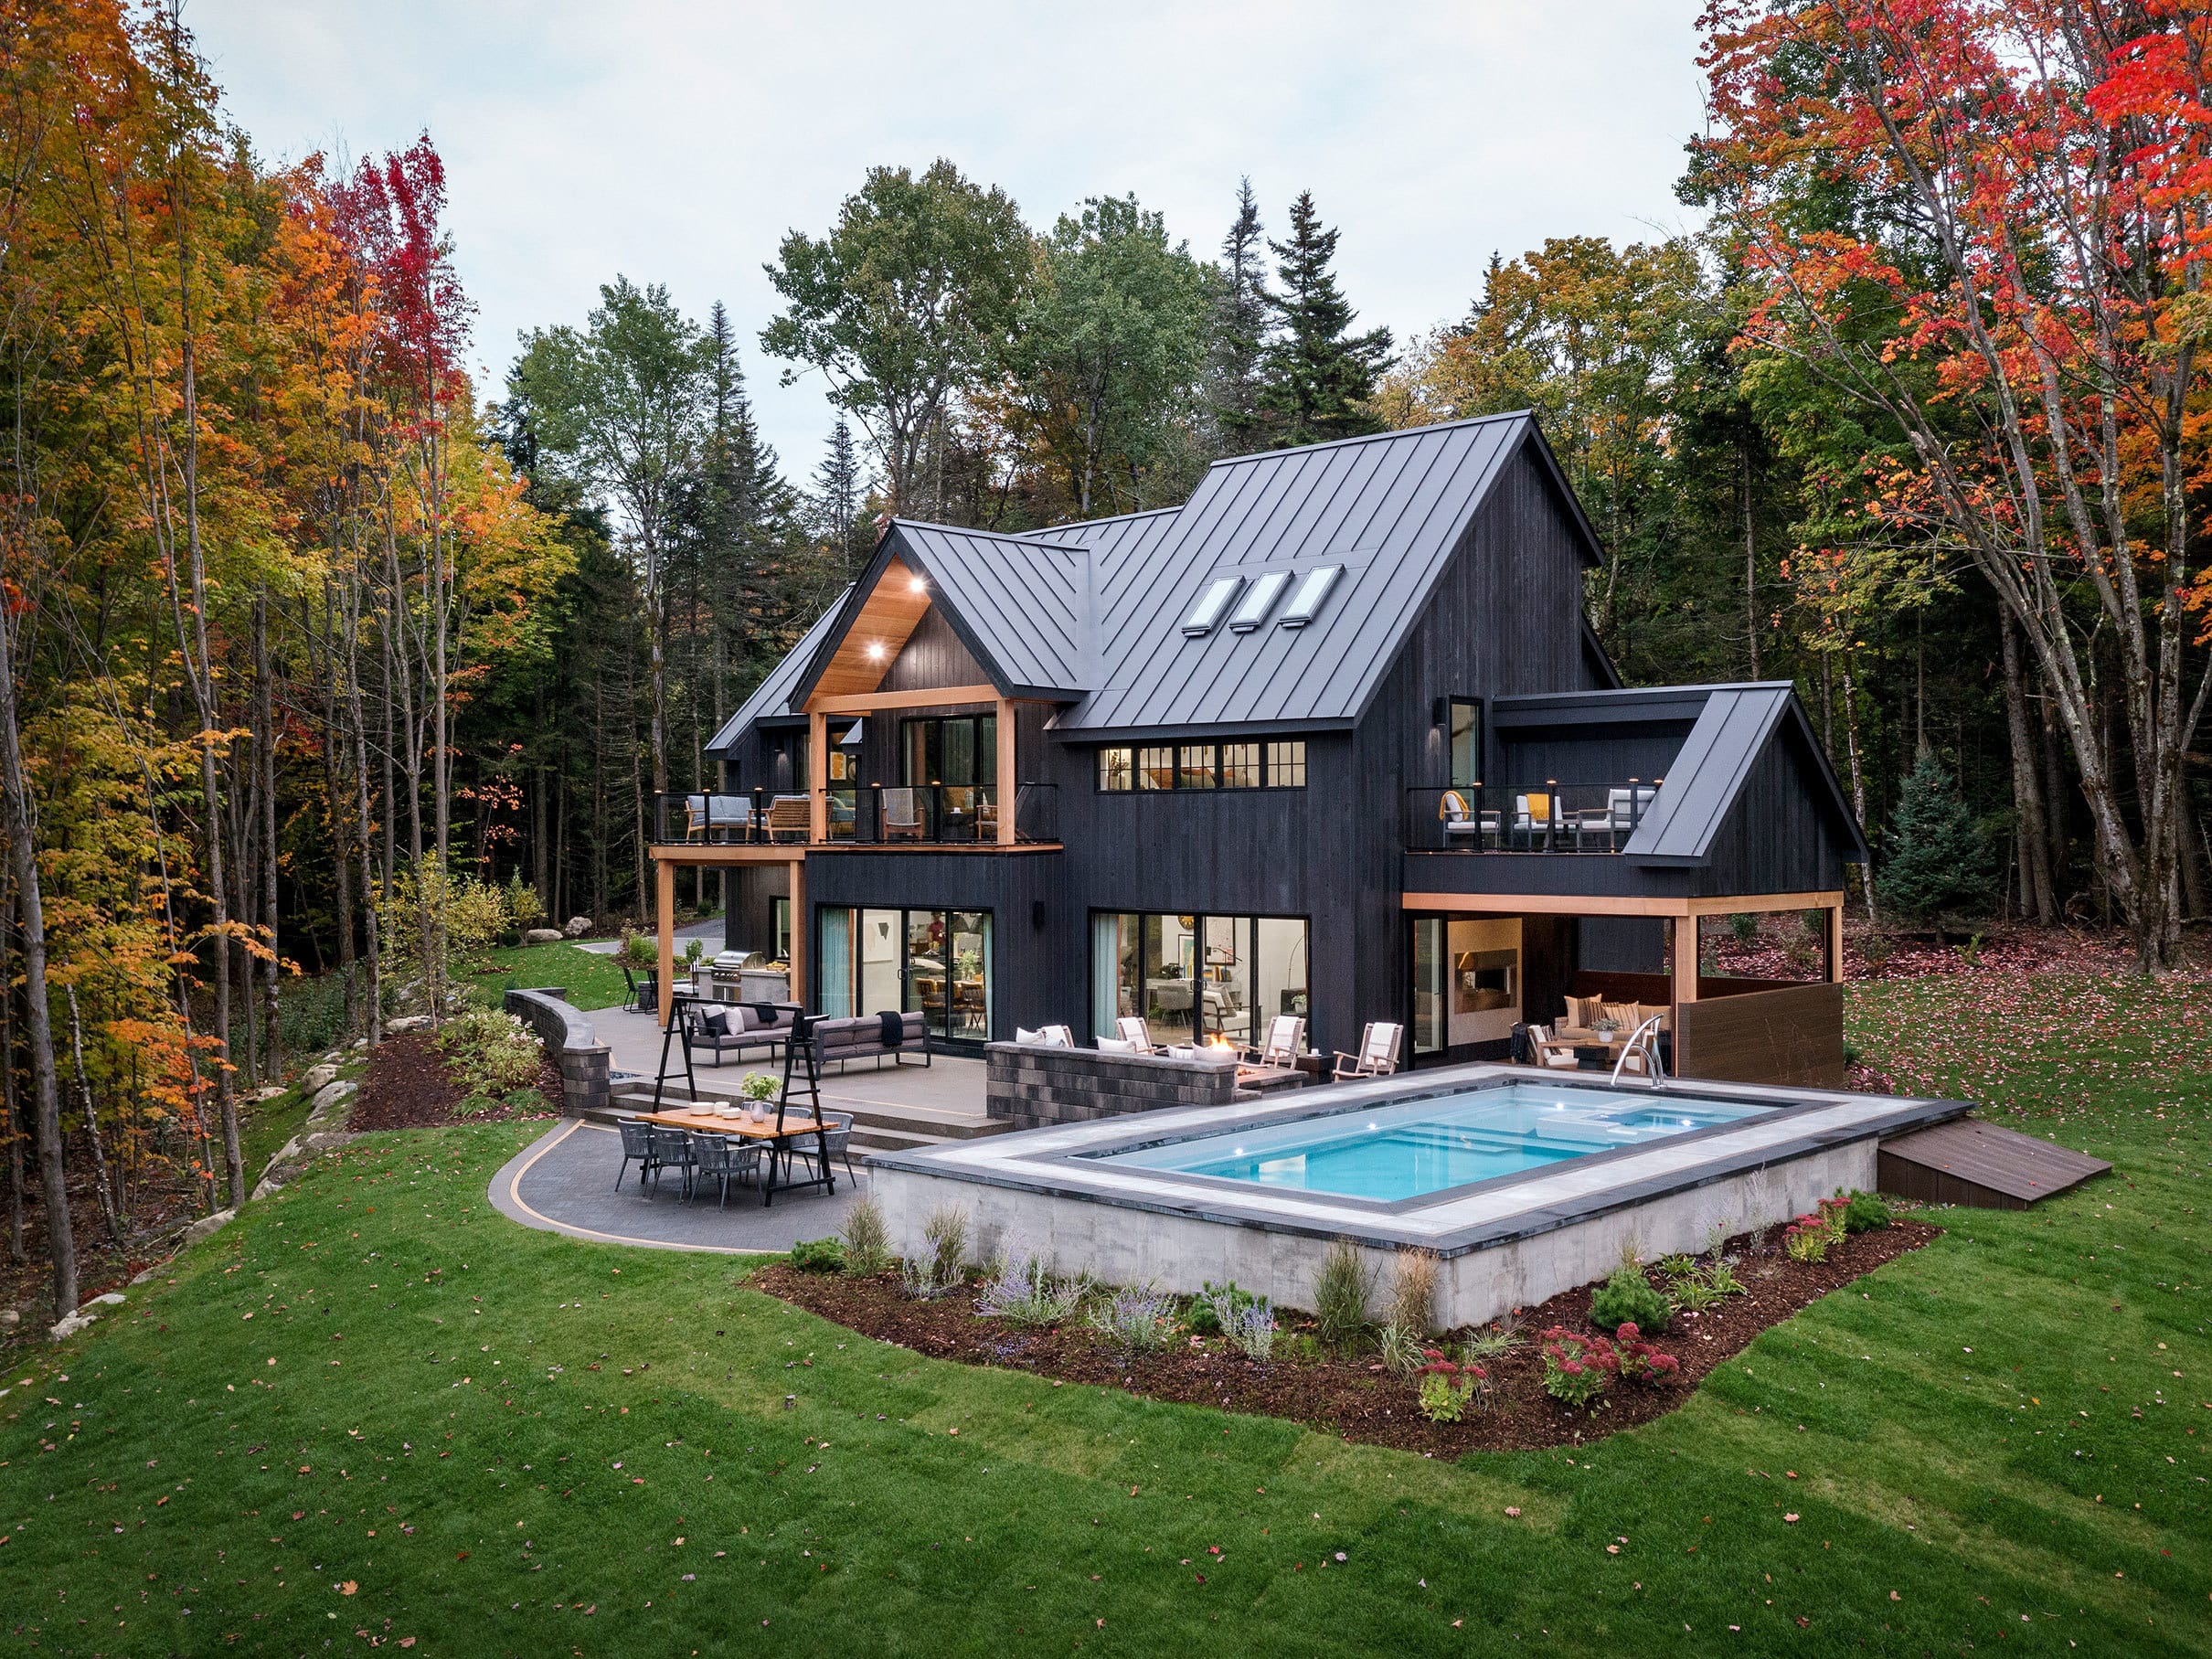 home exterior painted black with a metal roof and skylights surrounded by trees with autumn leaves